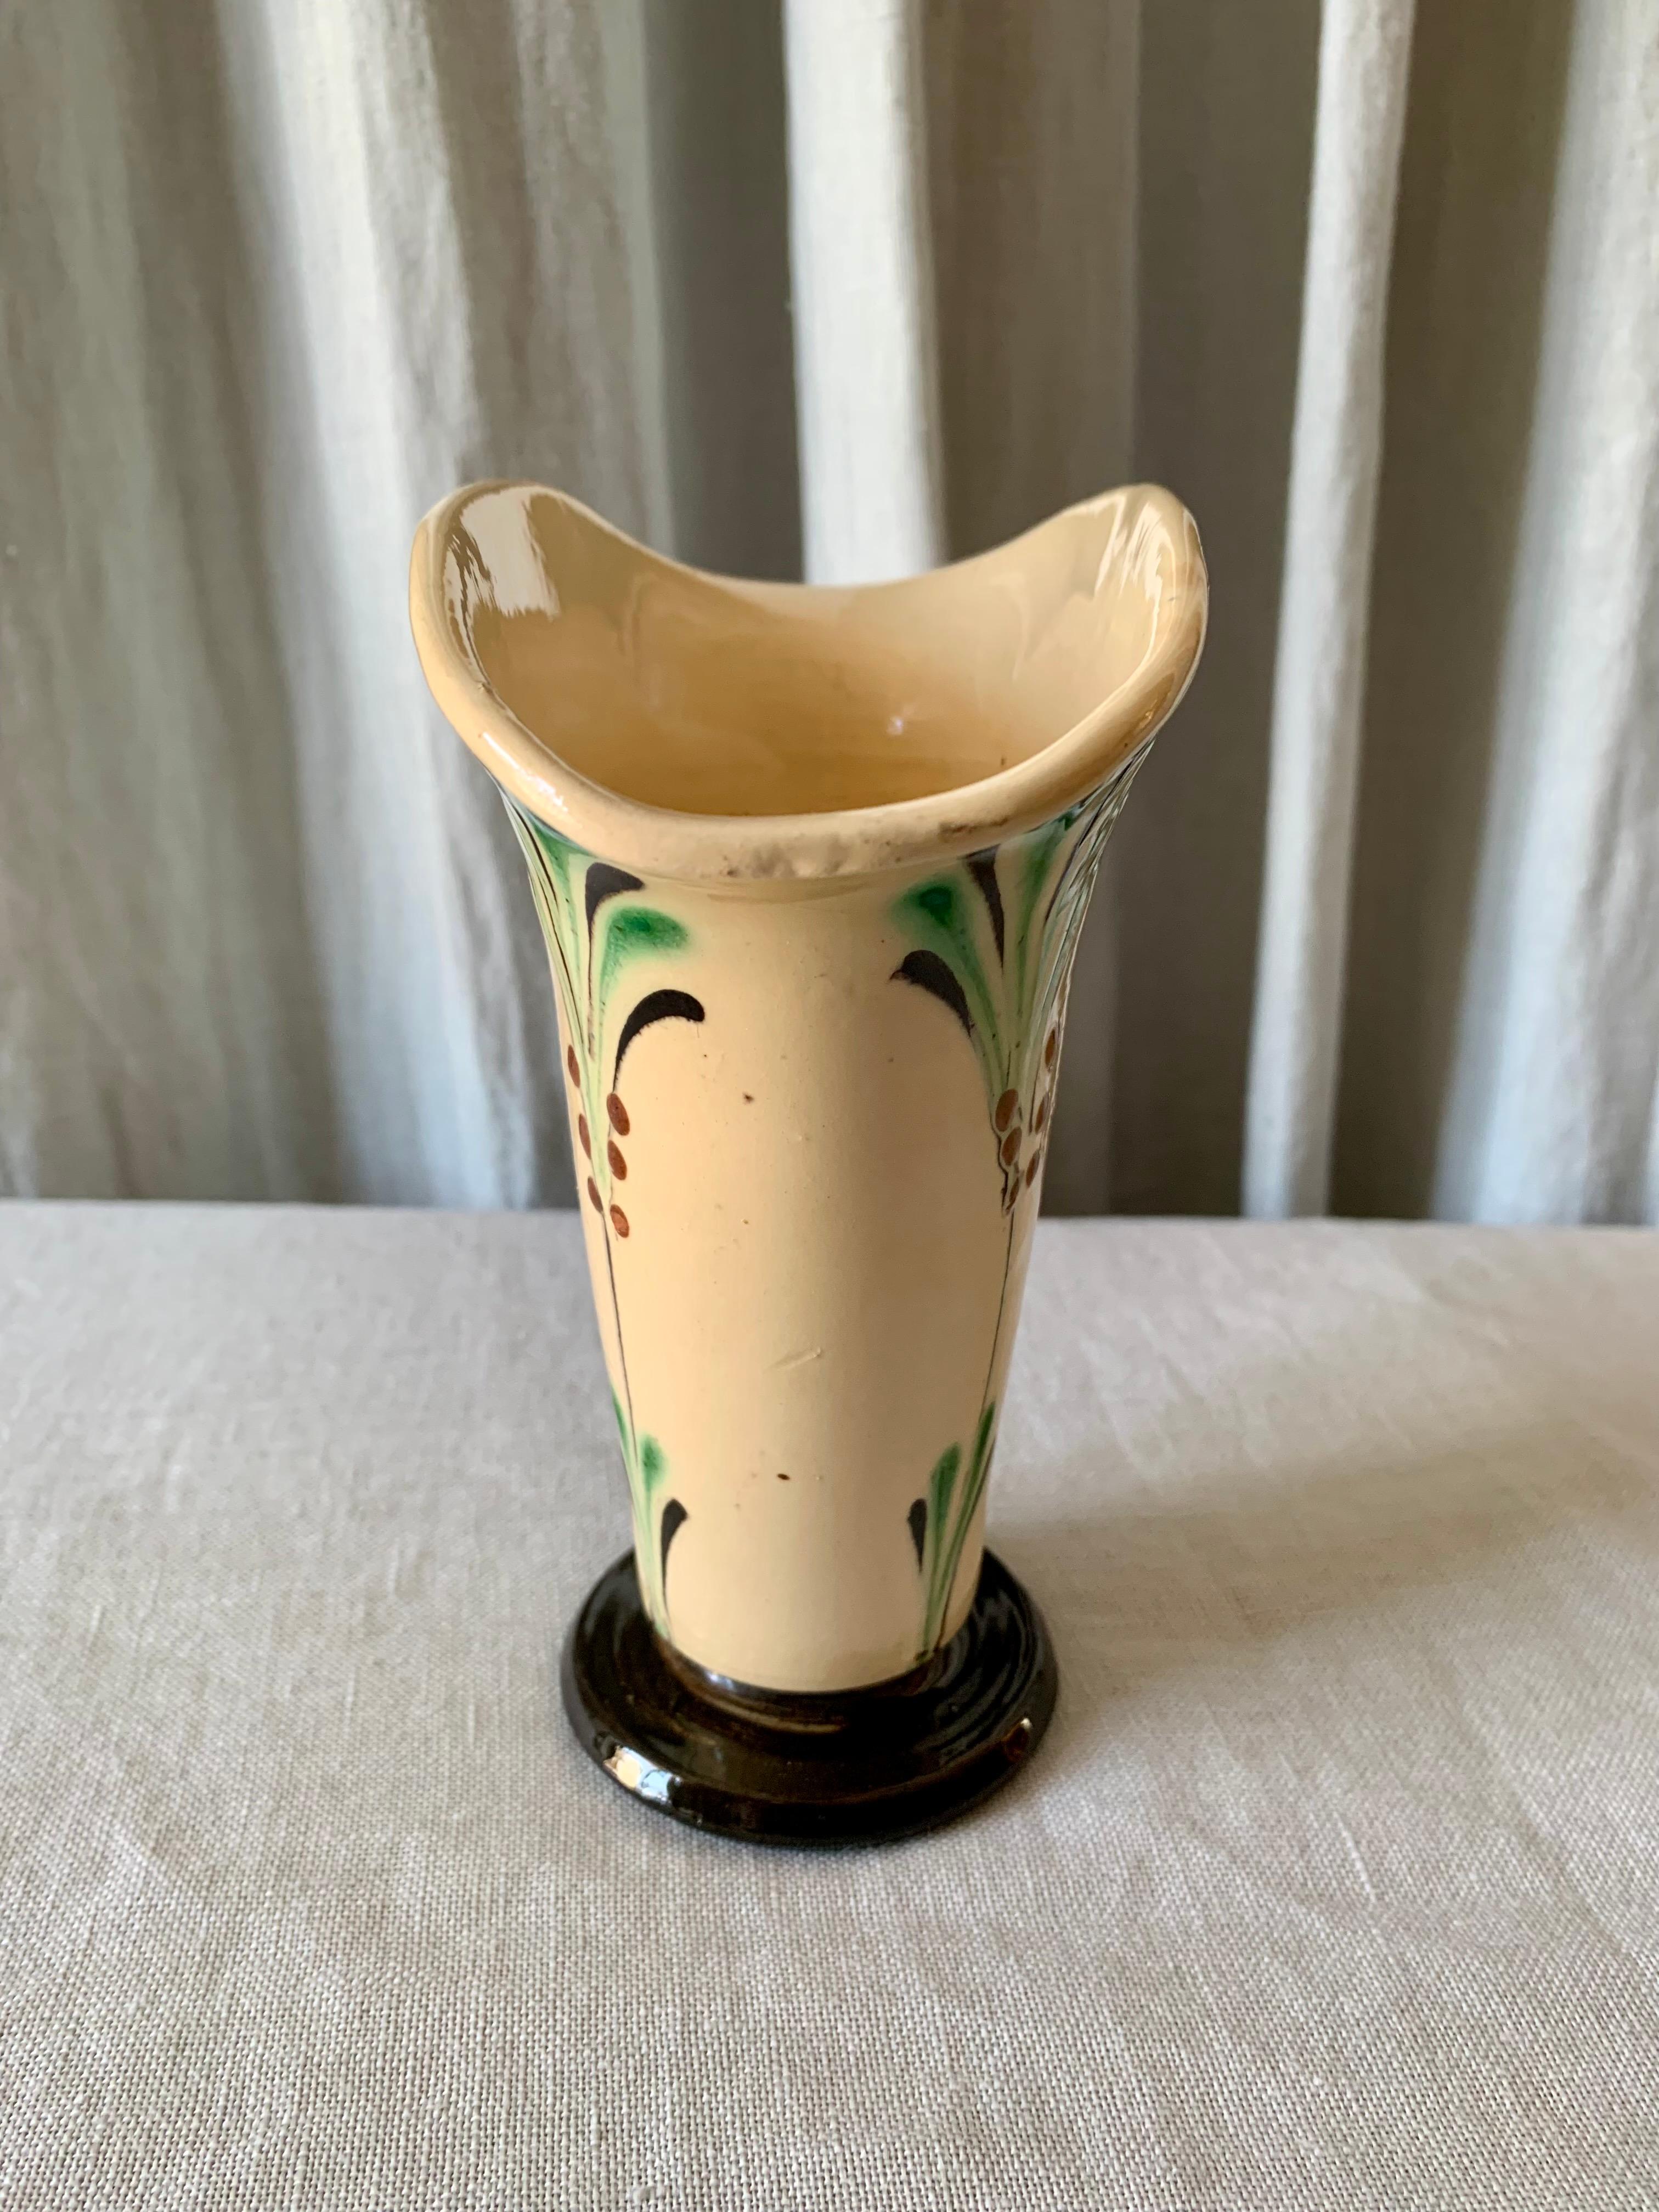 Danish 1930s ceramic vase by Kähler with a flattend shape which makes the bouquet of flowers unfold in a beautiful way. It is a vase shape that is very characteristic of the 1930s and very Art Deco. The vase has a very small chip on the upper rim -